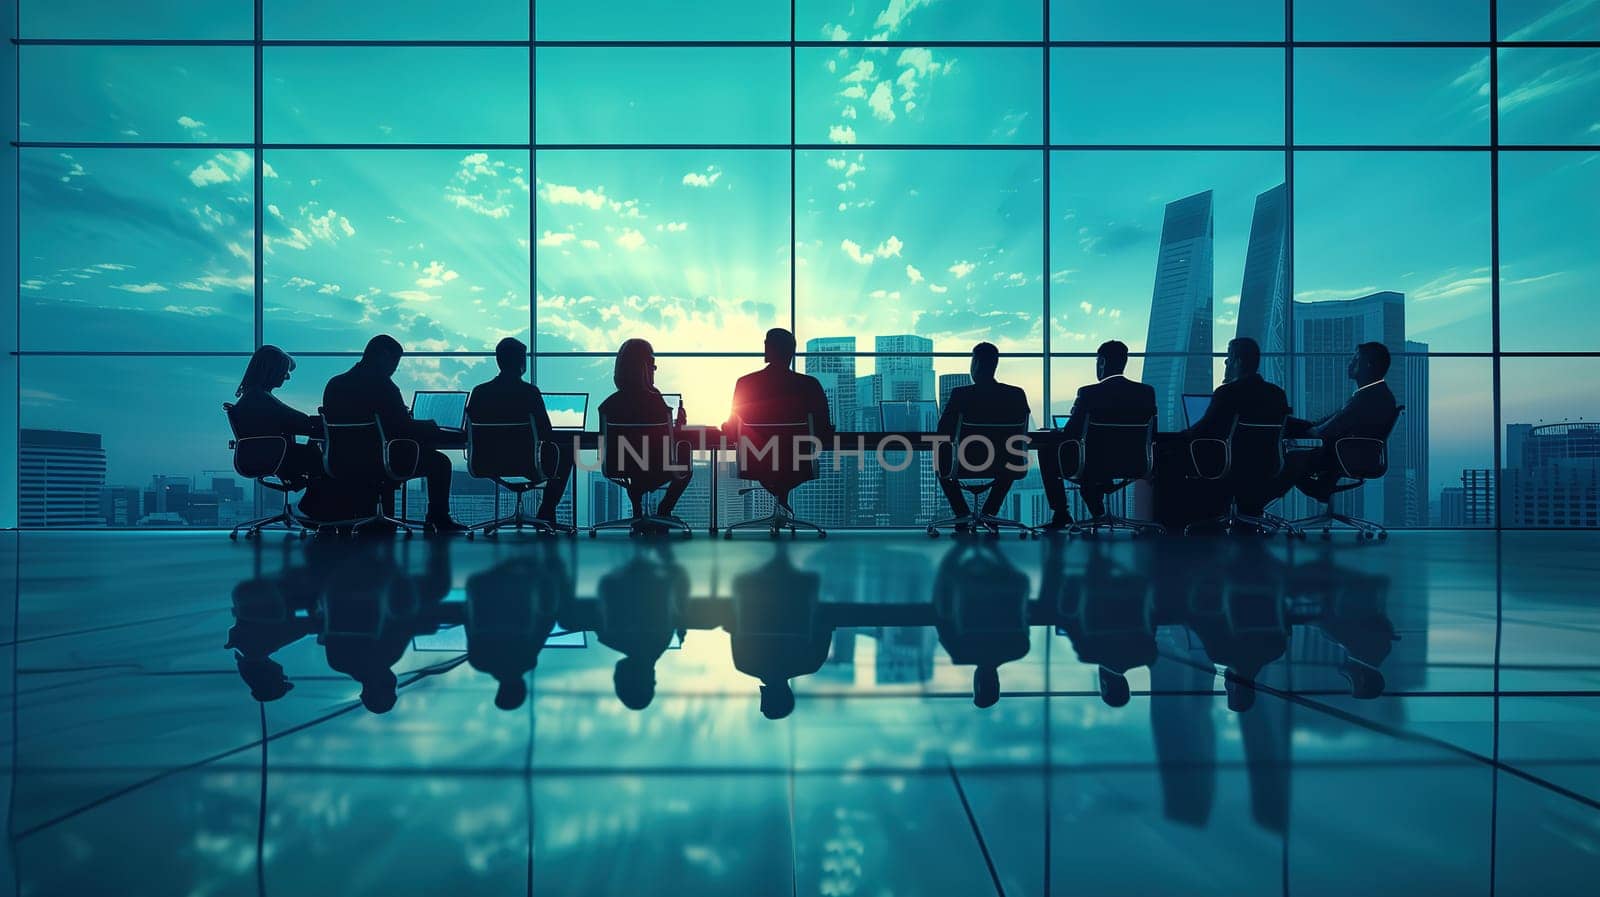 Silhouetted Business Professionals in a Meeting Overlooking City Skyline at Dusk by TRMK